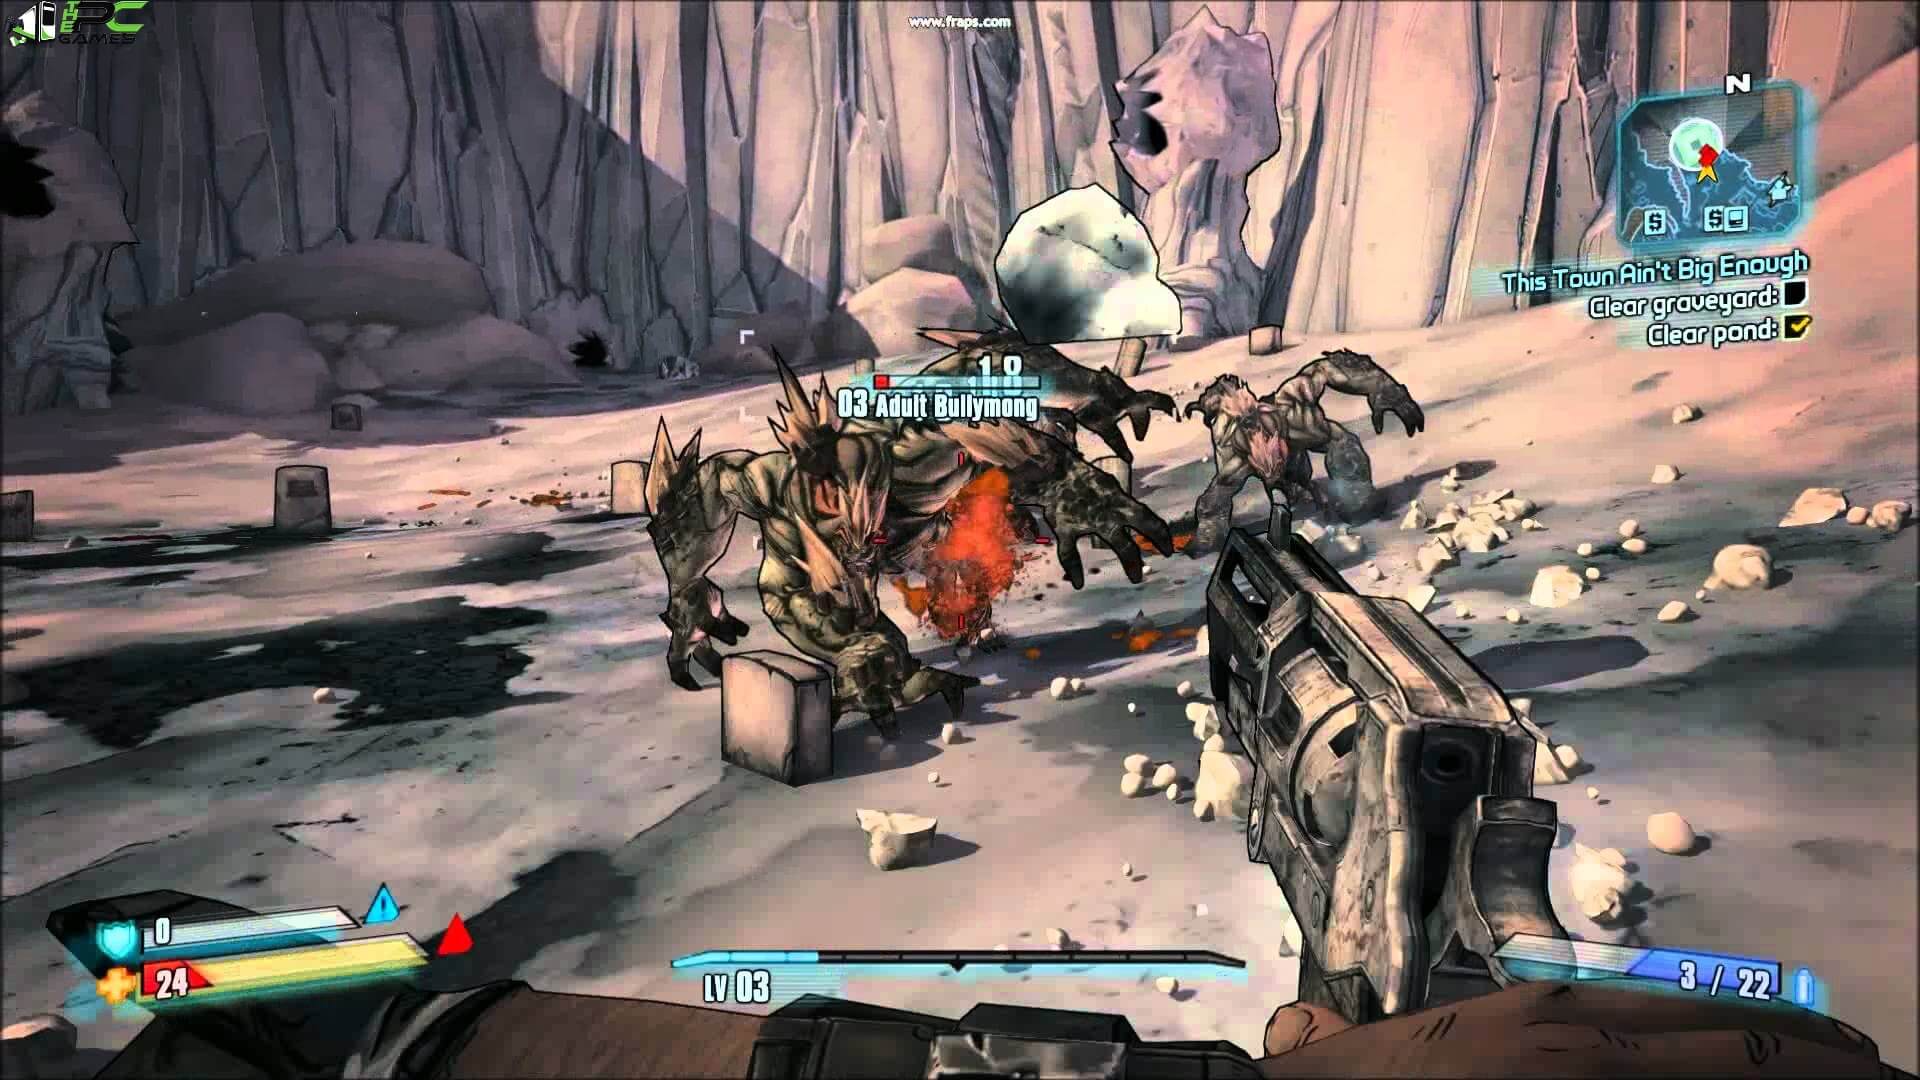 borderlands 2 latest patch download free